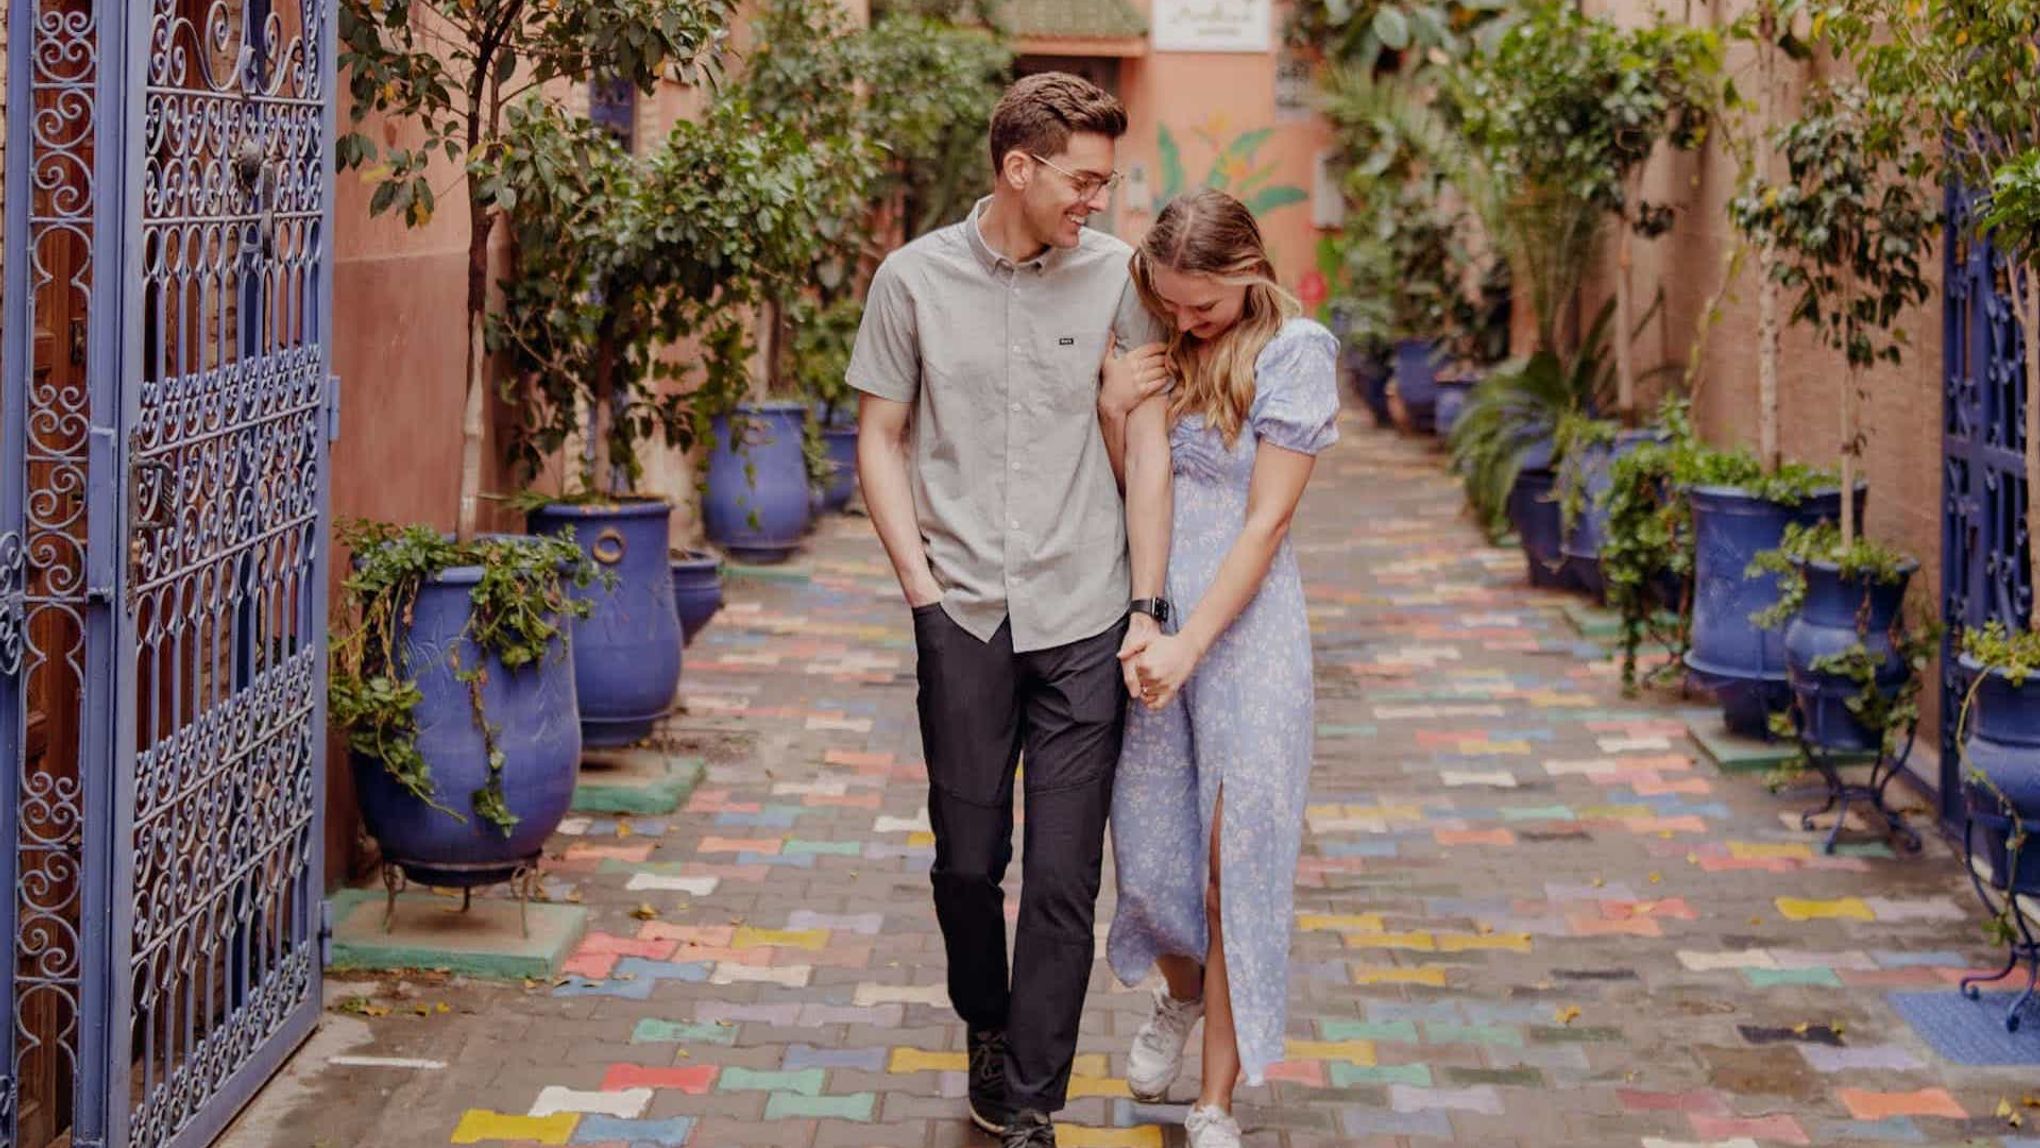 Grant and Leah holding hands in Morocco